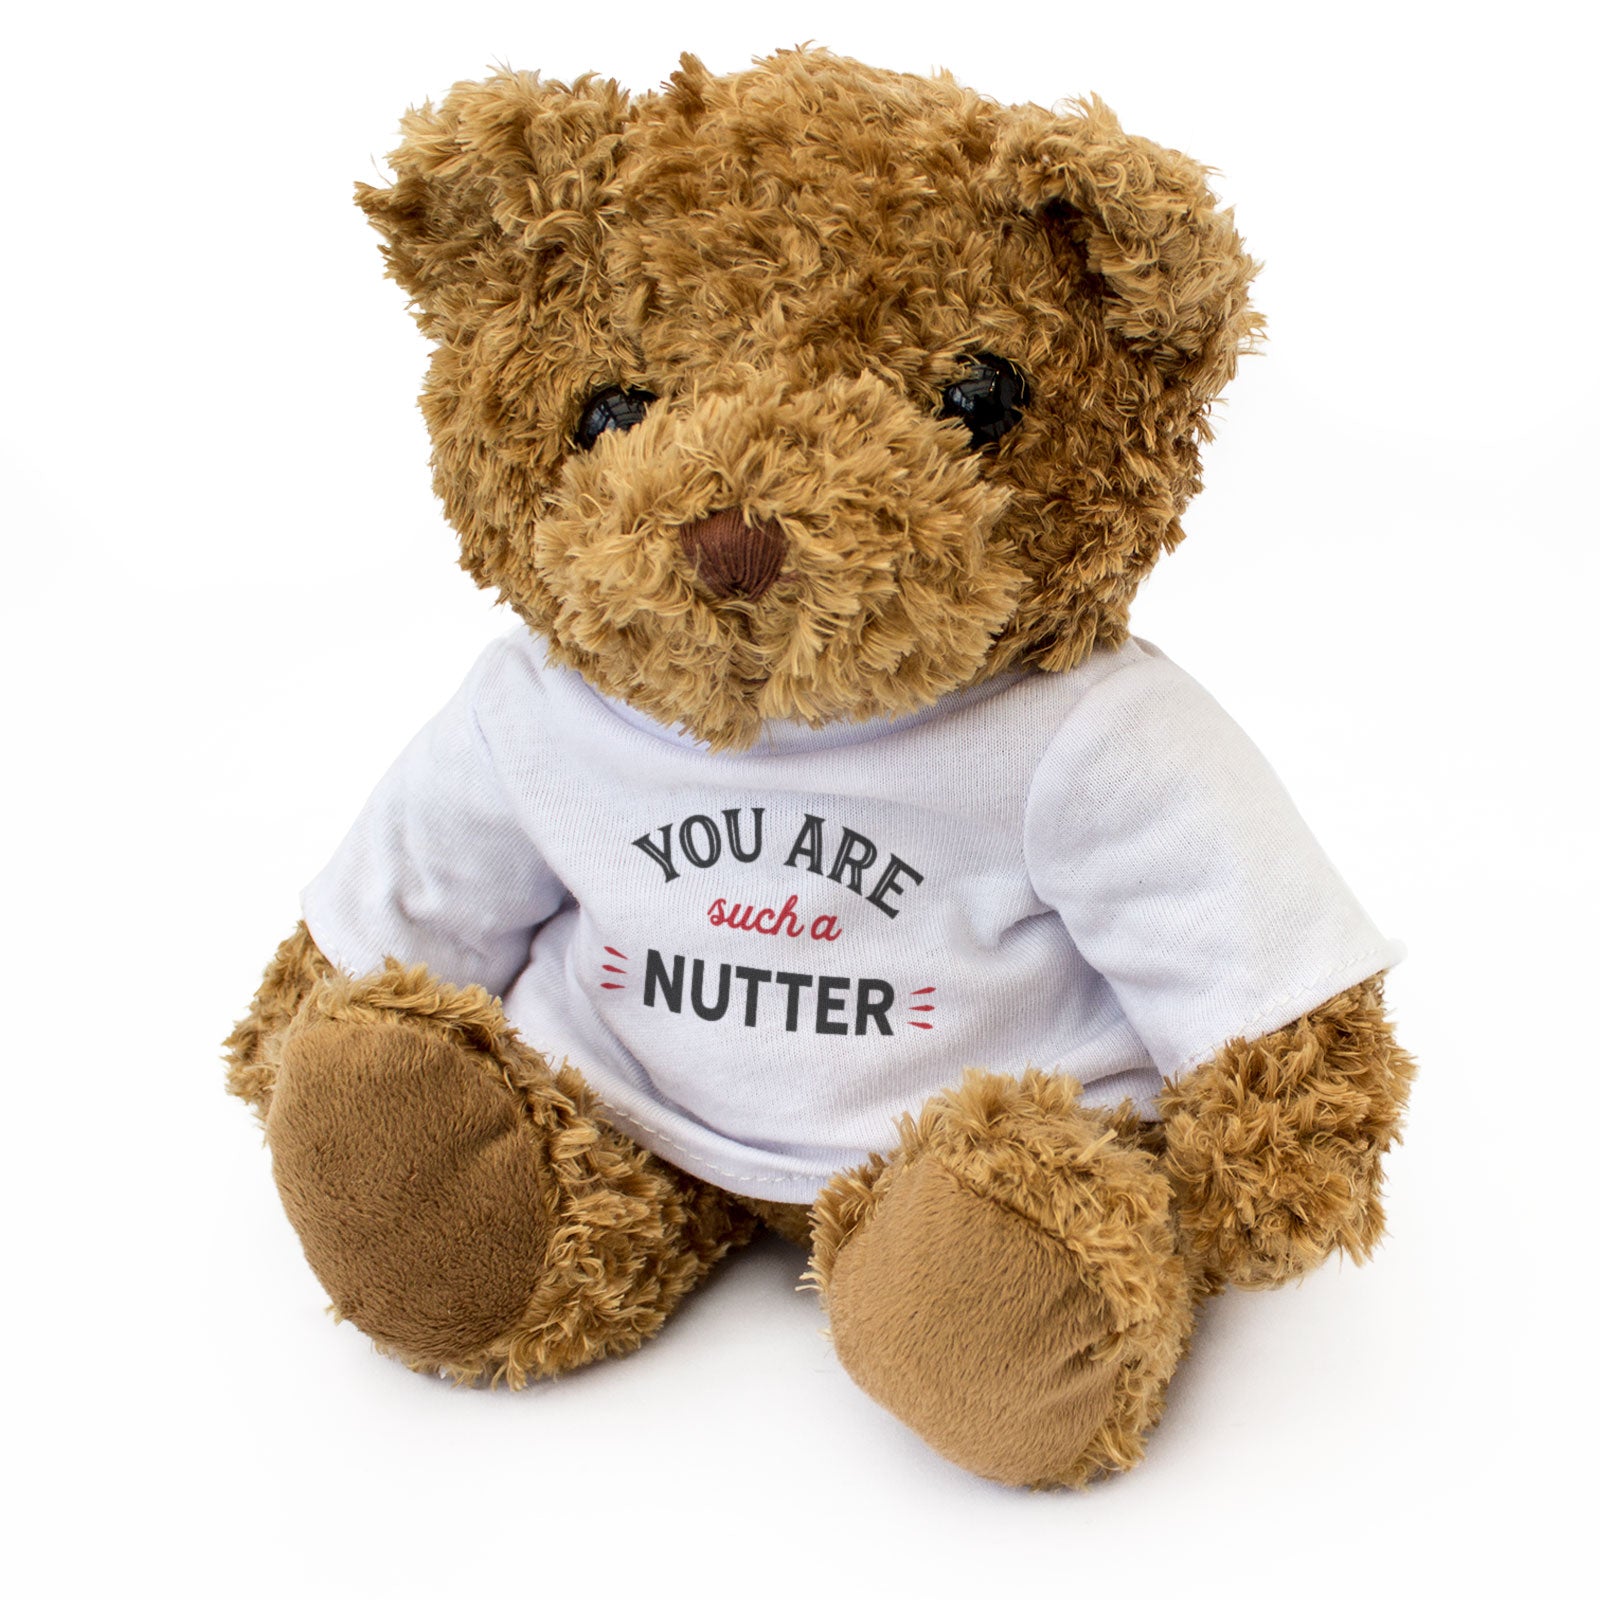 You Are Such A Nutter - Teddy Bear